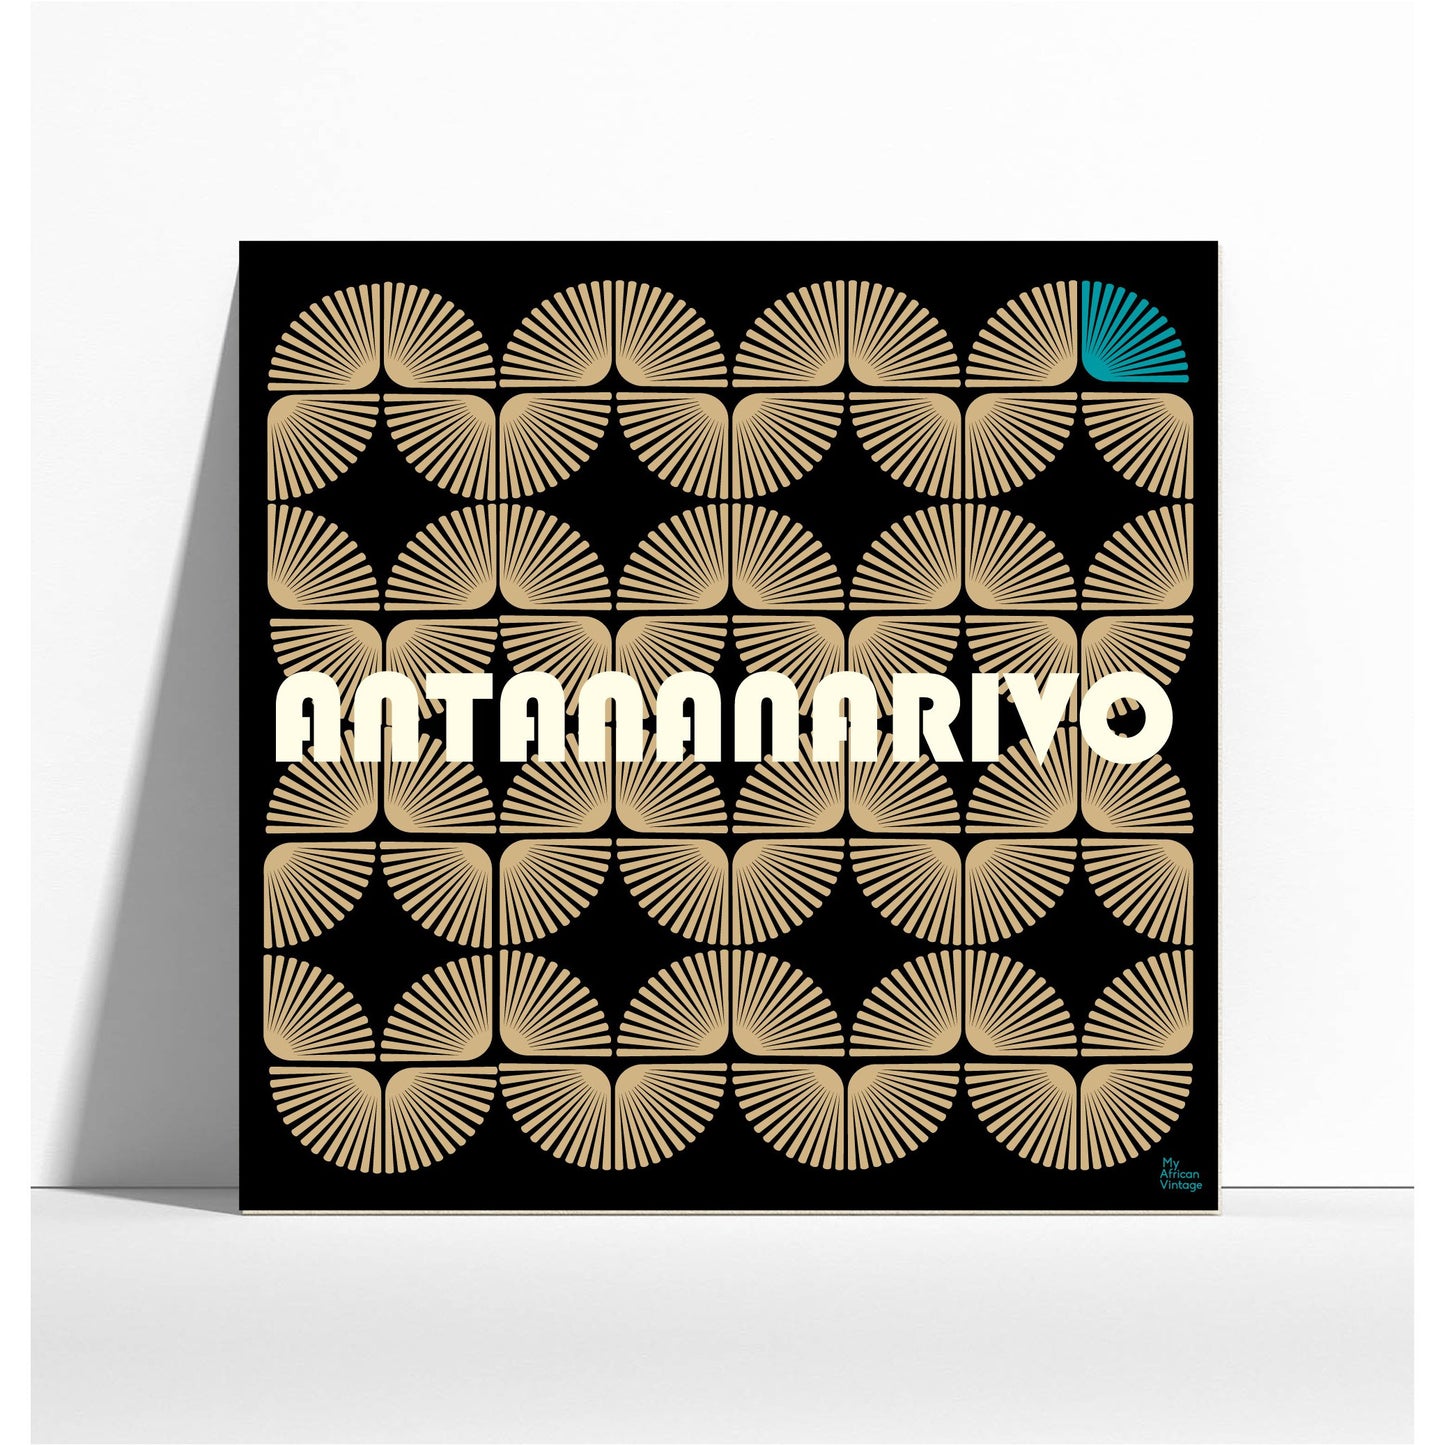 Affiche style rétro "Antananarivo" - collection "My African Vintage"